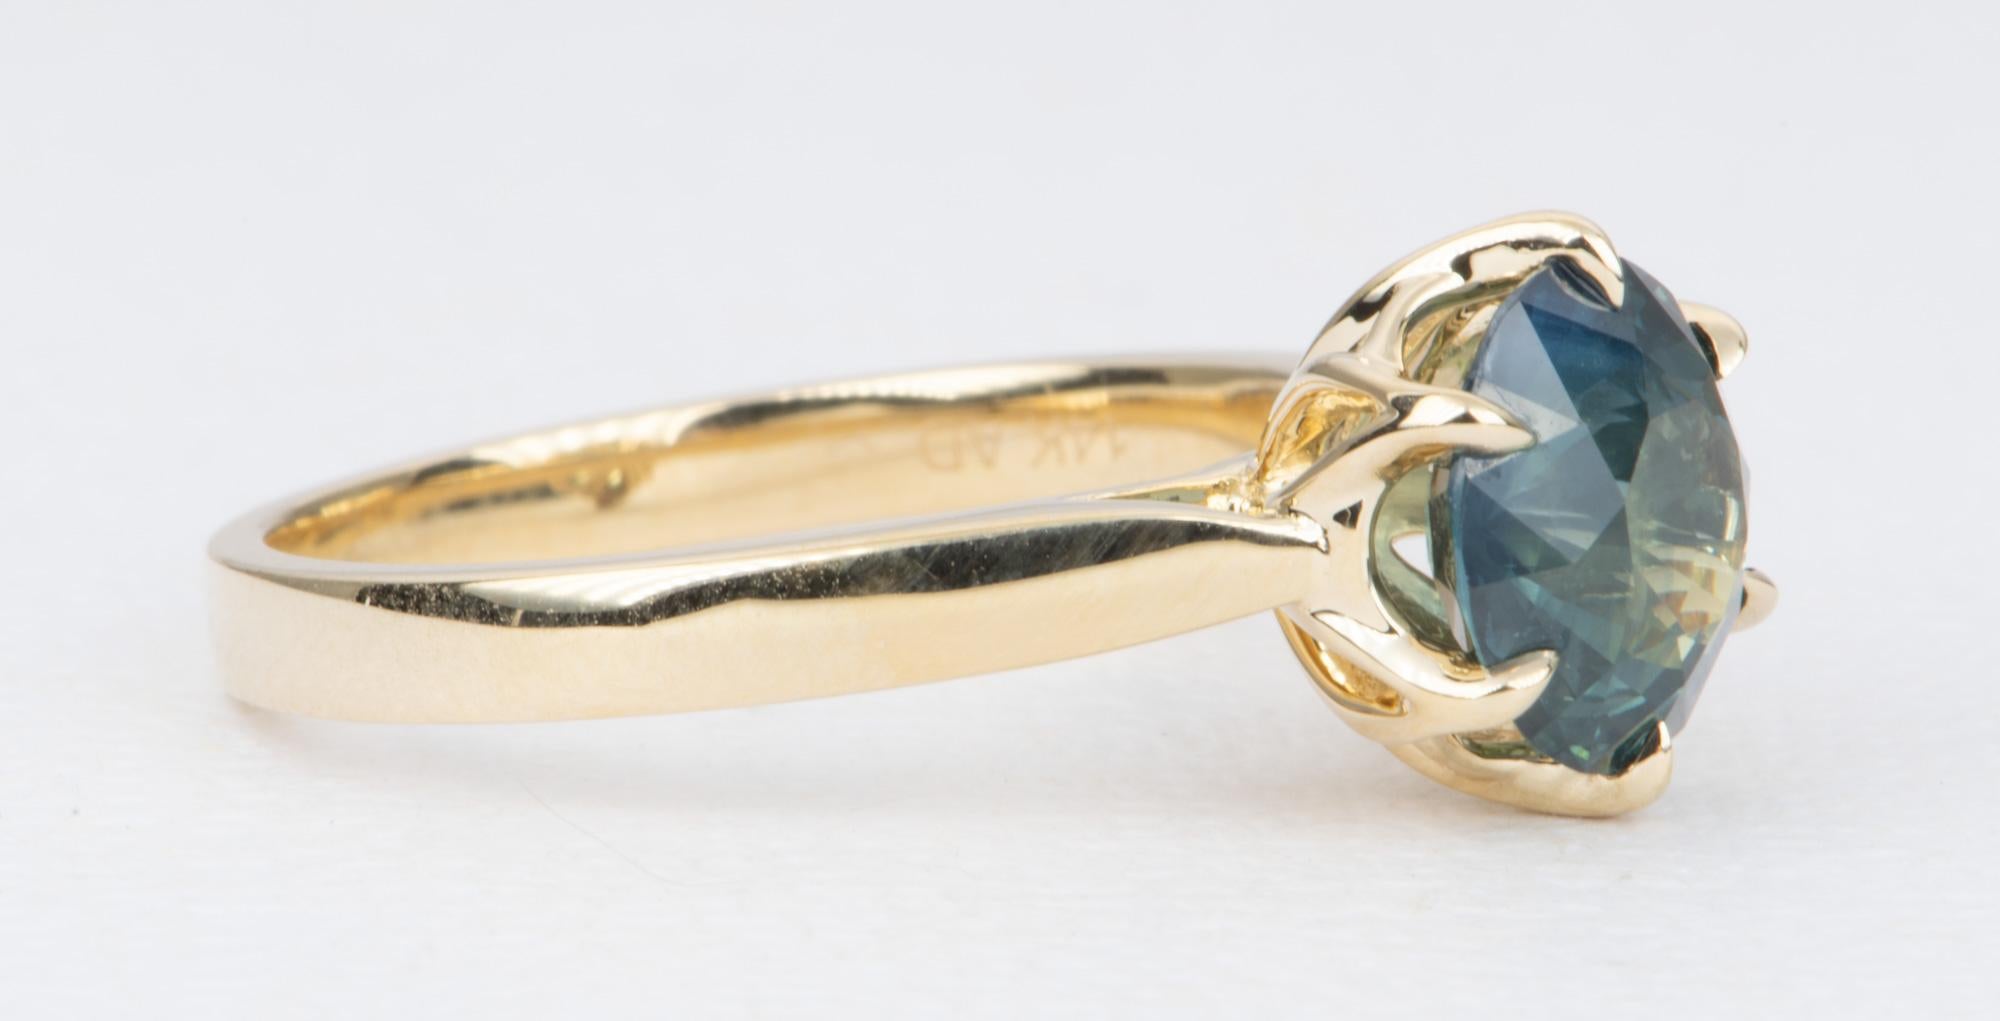 ♥  Solid 14K gold ring set with a beautiful round brilliant cut sapphire in the center
♥  Set in a 6-prong tulip style setting
♥  The sapphire is a green blue sapphire, meaning it is predominantly blue with a green undertone. The studio photos were